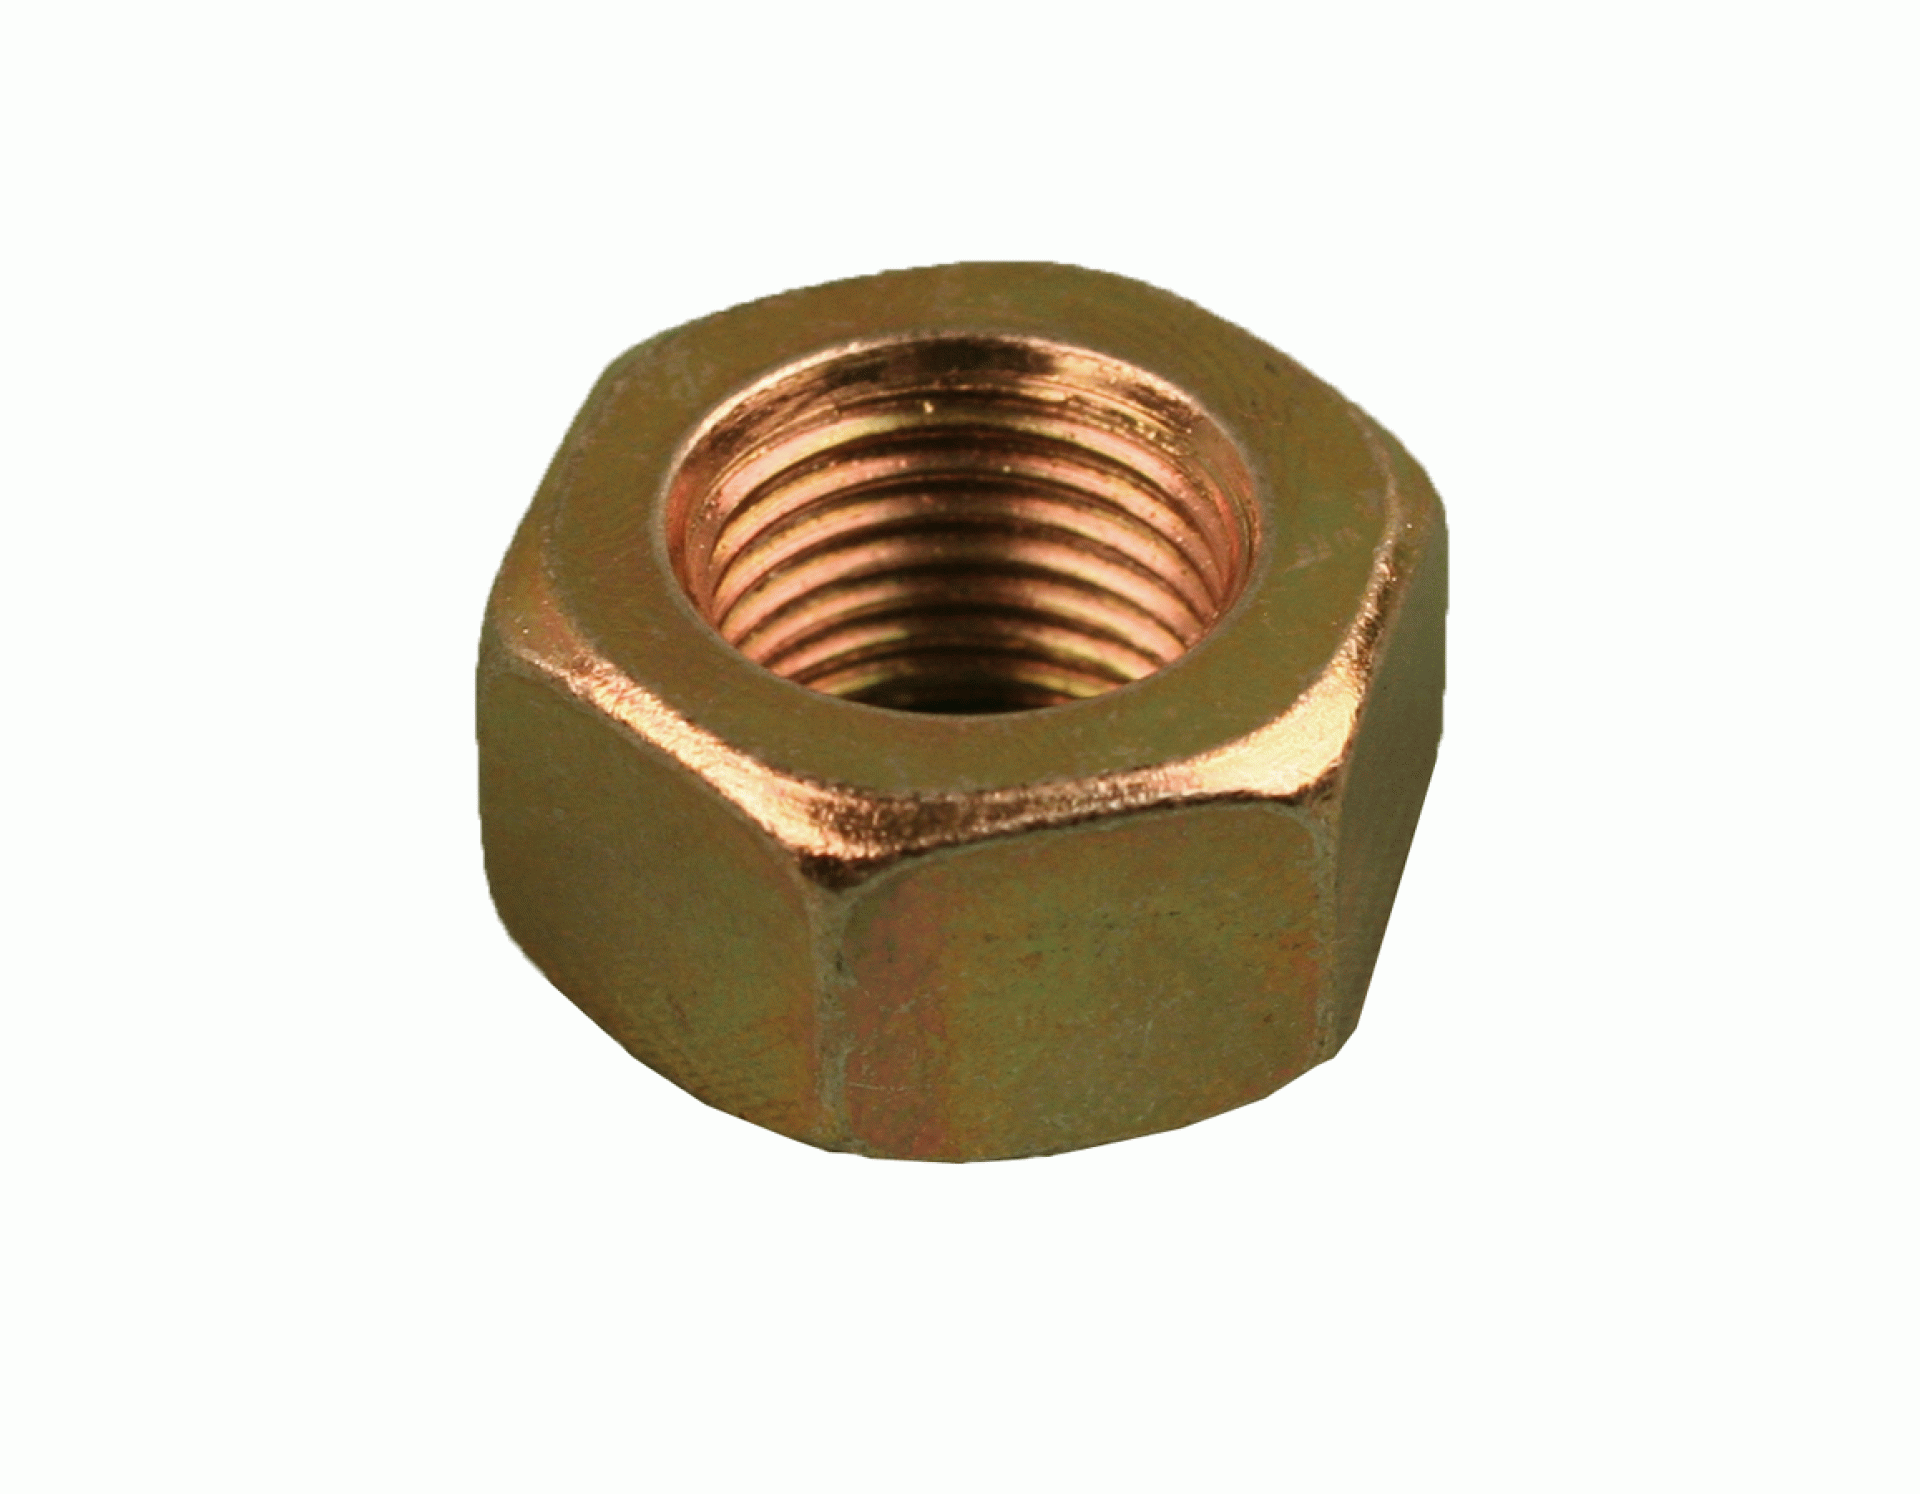 N TOW | 0257 | NUT HEX CENTER LOCK BOX OF 50 9/16 INCH